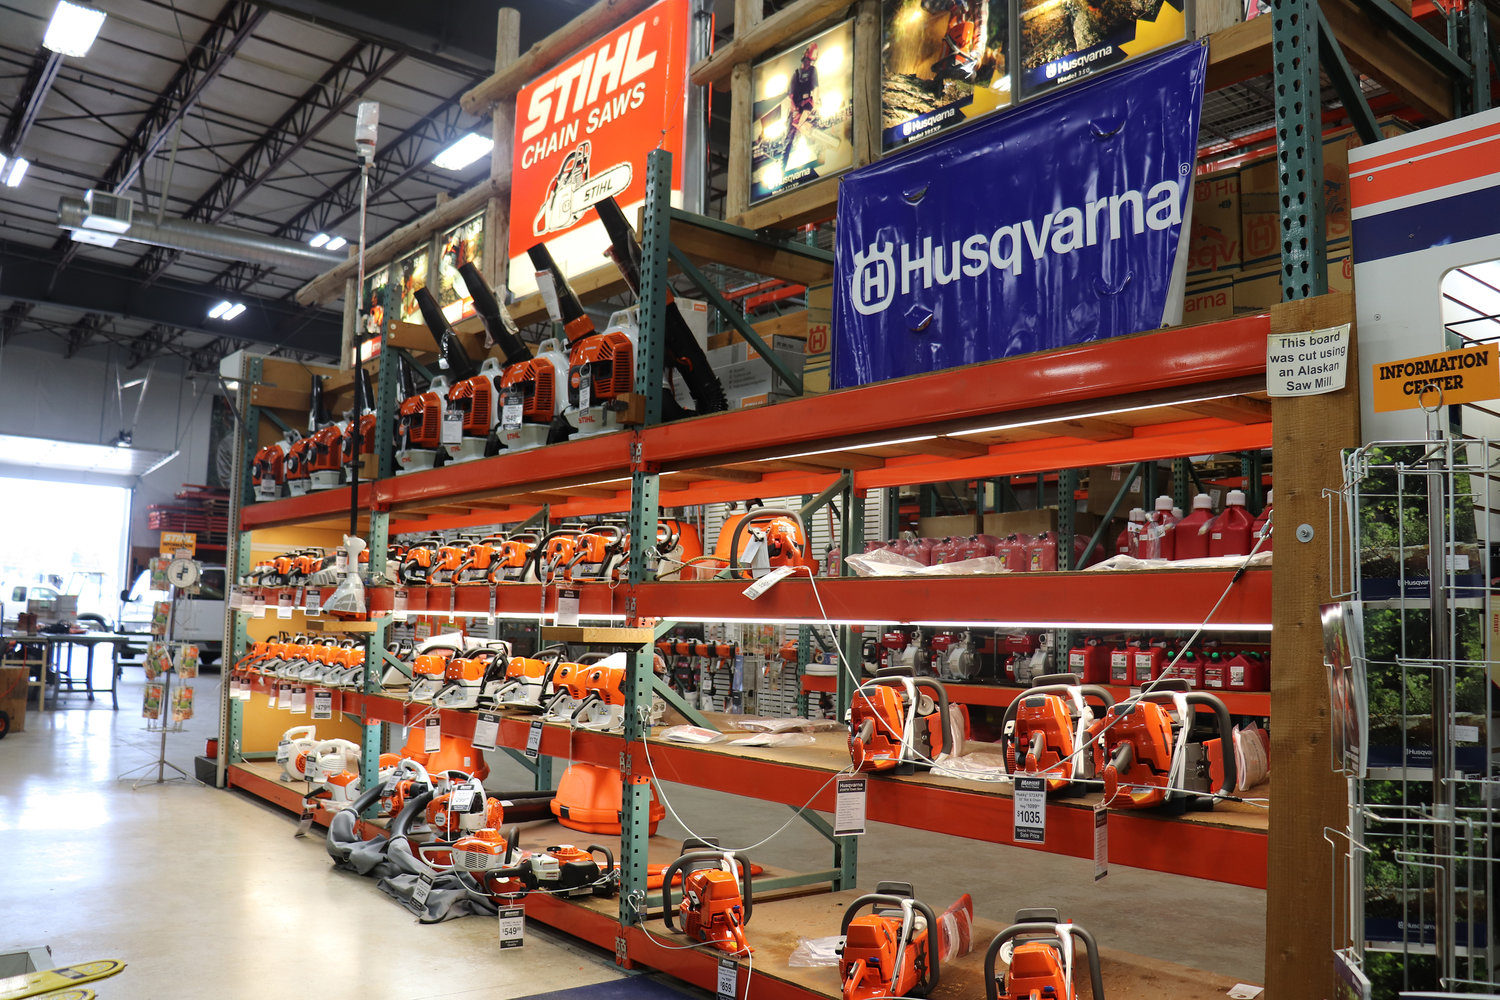 Madsen’s became a certified dealer for a now-discontinued chainsaw company, IEL, in 1952, and became a certified STIHL dealer in 1970. The store is now an authorized dealer of STIHL, Husqvarna and Honda power equipment.